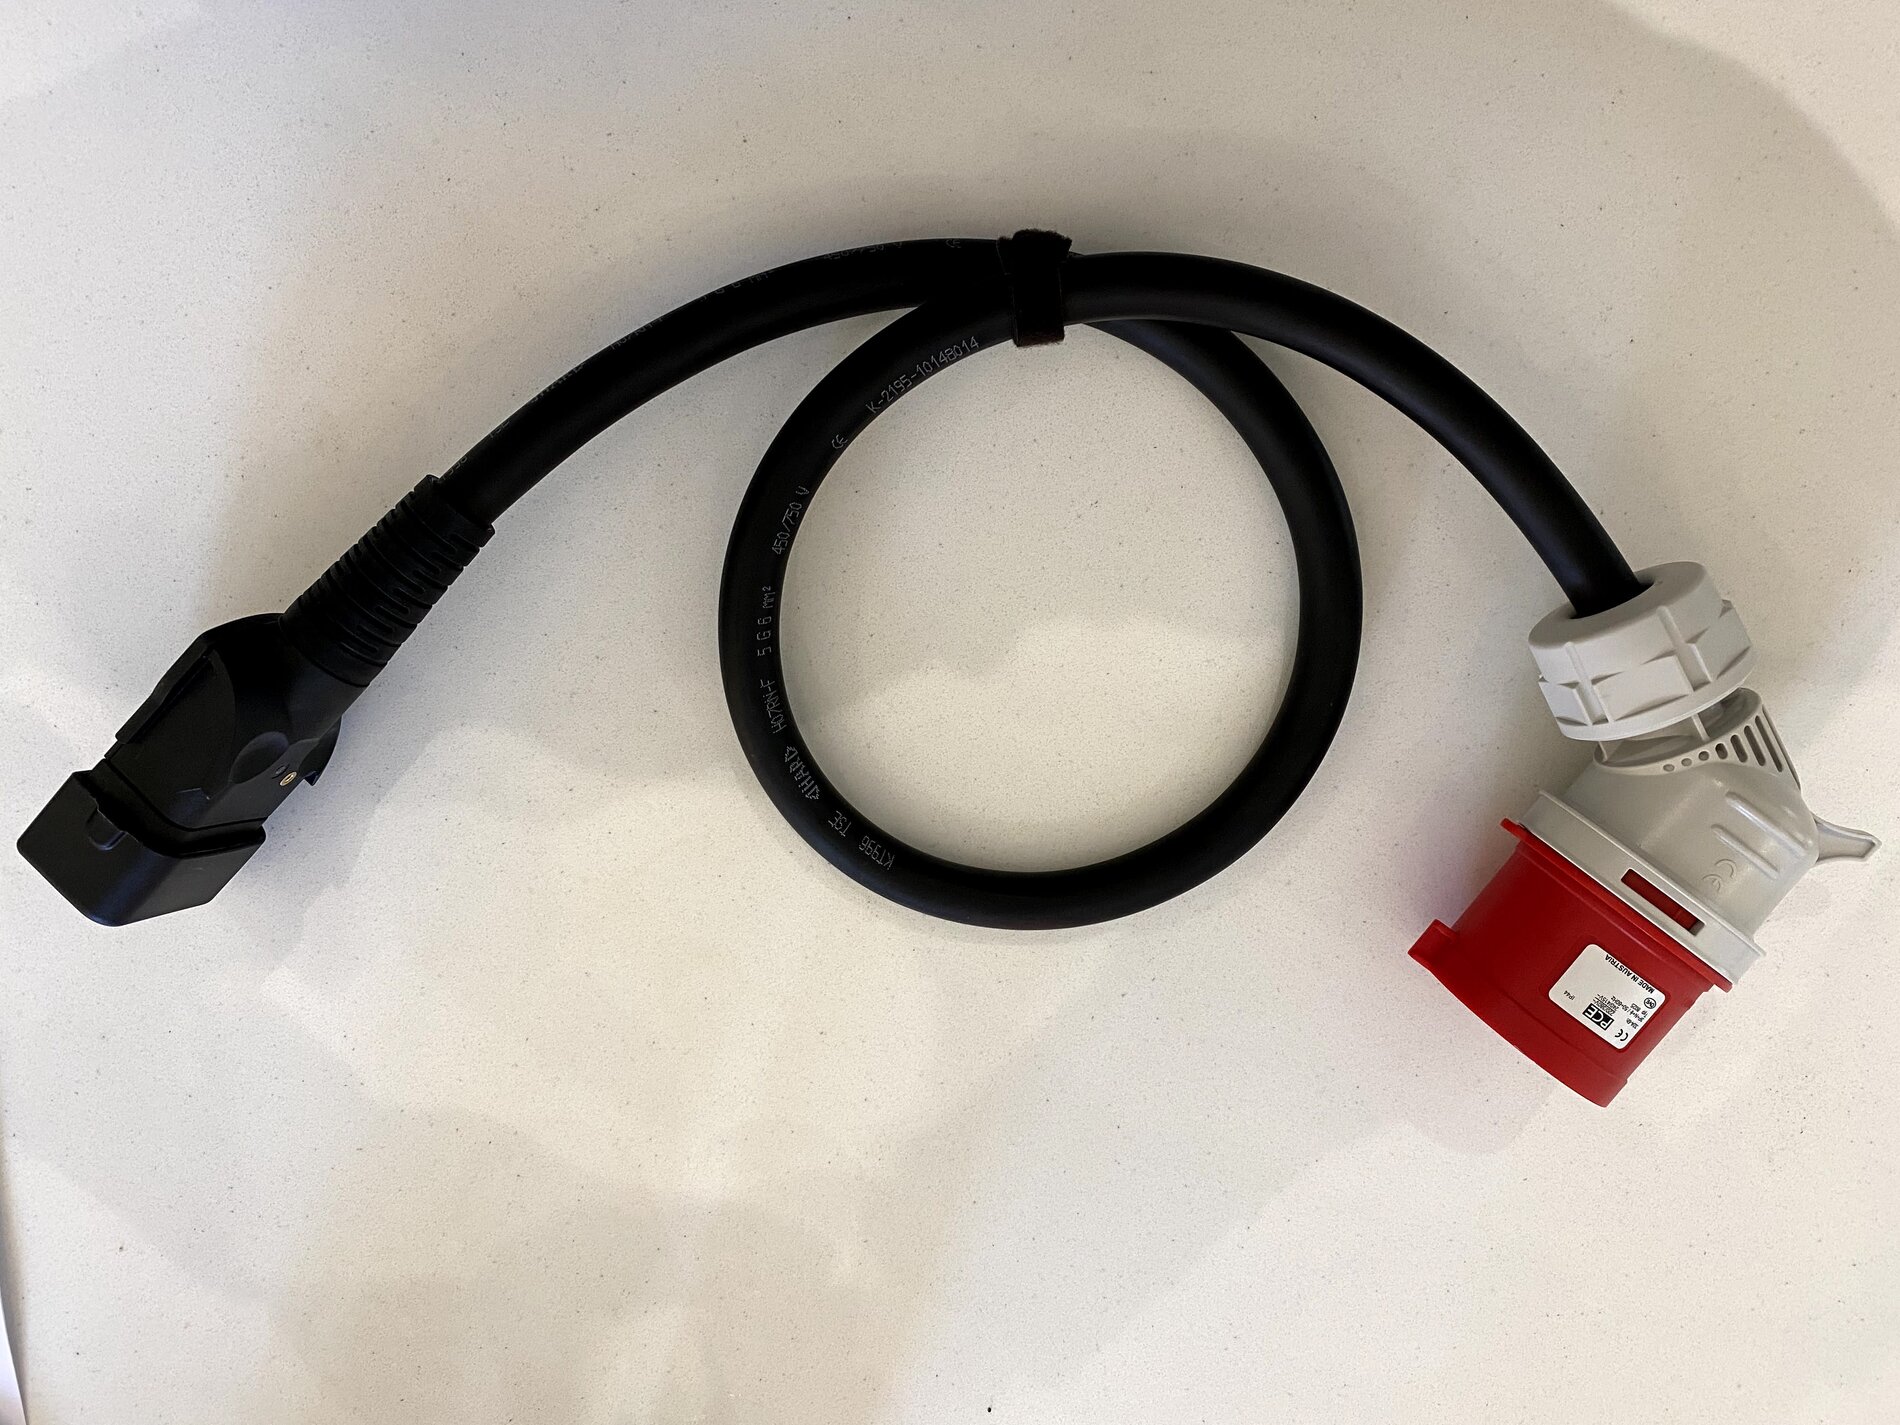 Porsche Taycan Wanted: PMC Plus - Red 32amp 400v supply cable 7121953E-66C6-40A7-838A-2ADDC8658433